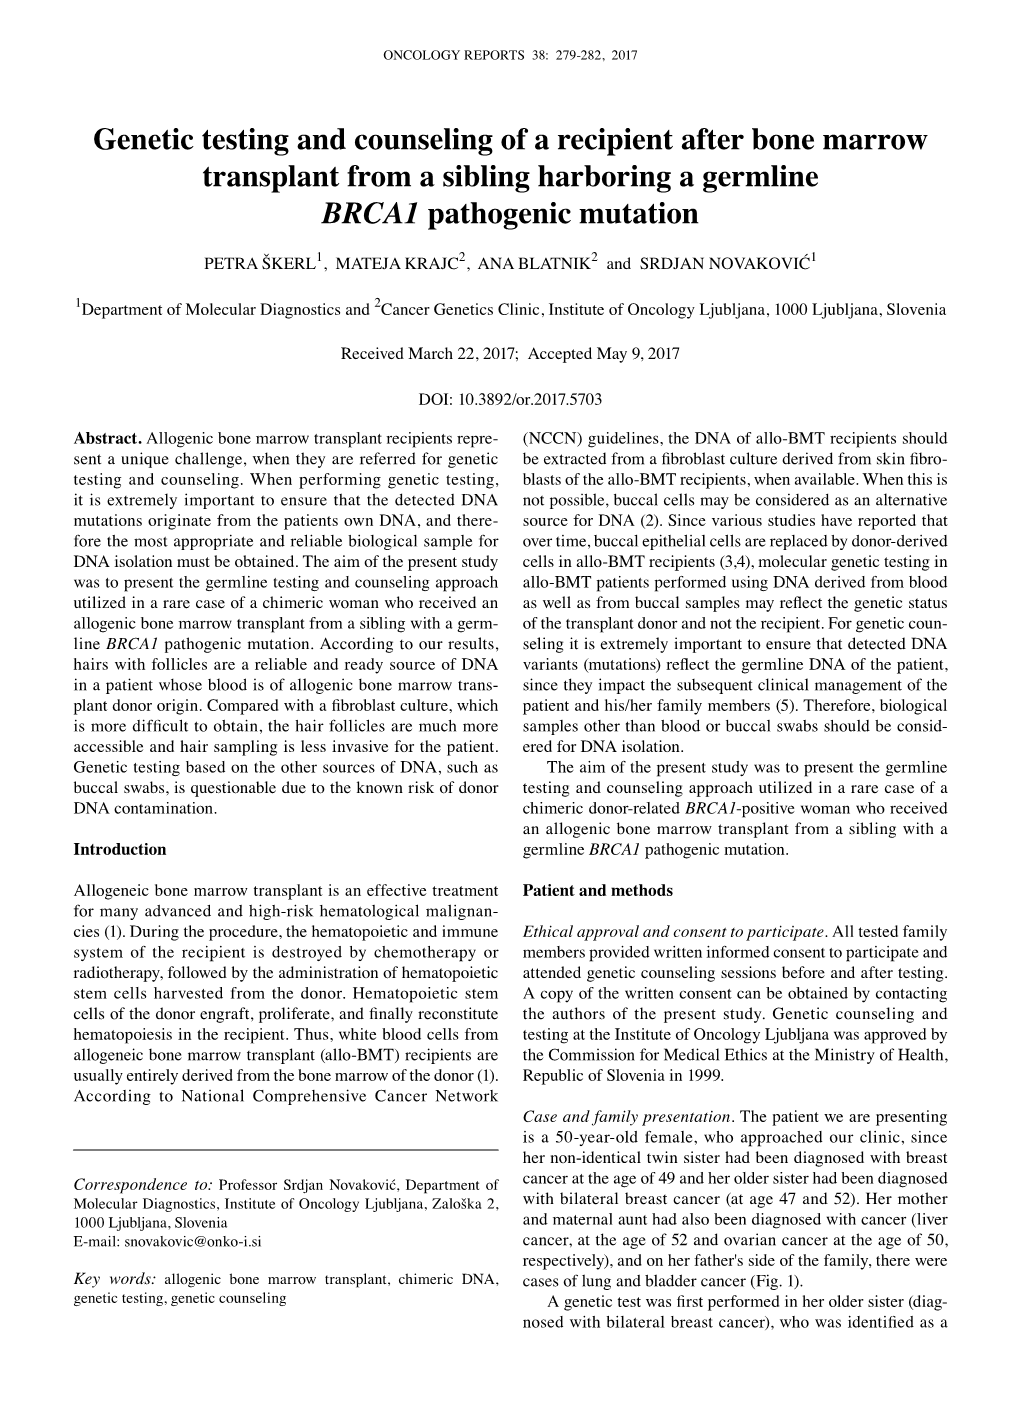 Genetic Testing and Counseling of a Recipient After Bone Marrow Transplant from a Sibling Harboring a Germline BRCA1 Pathogenic Mutation